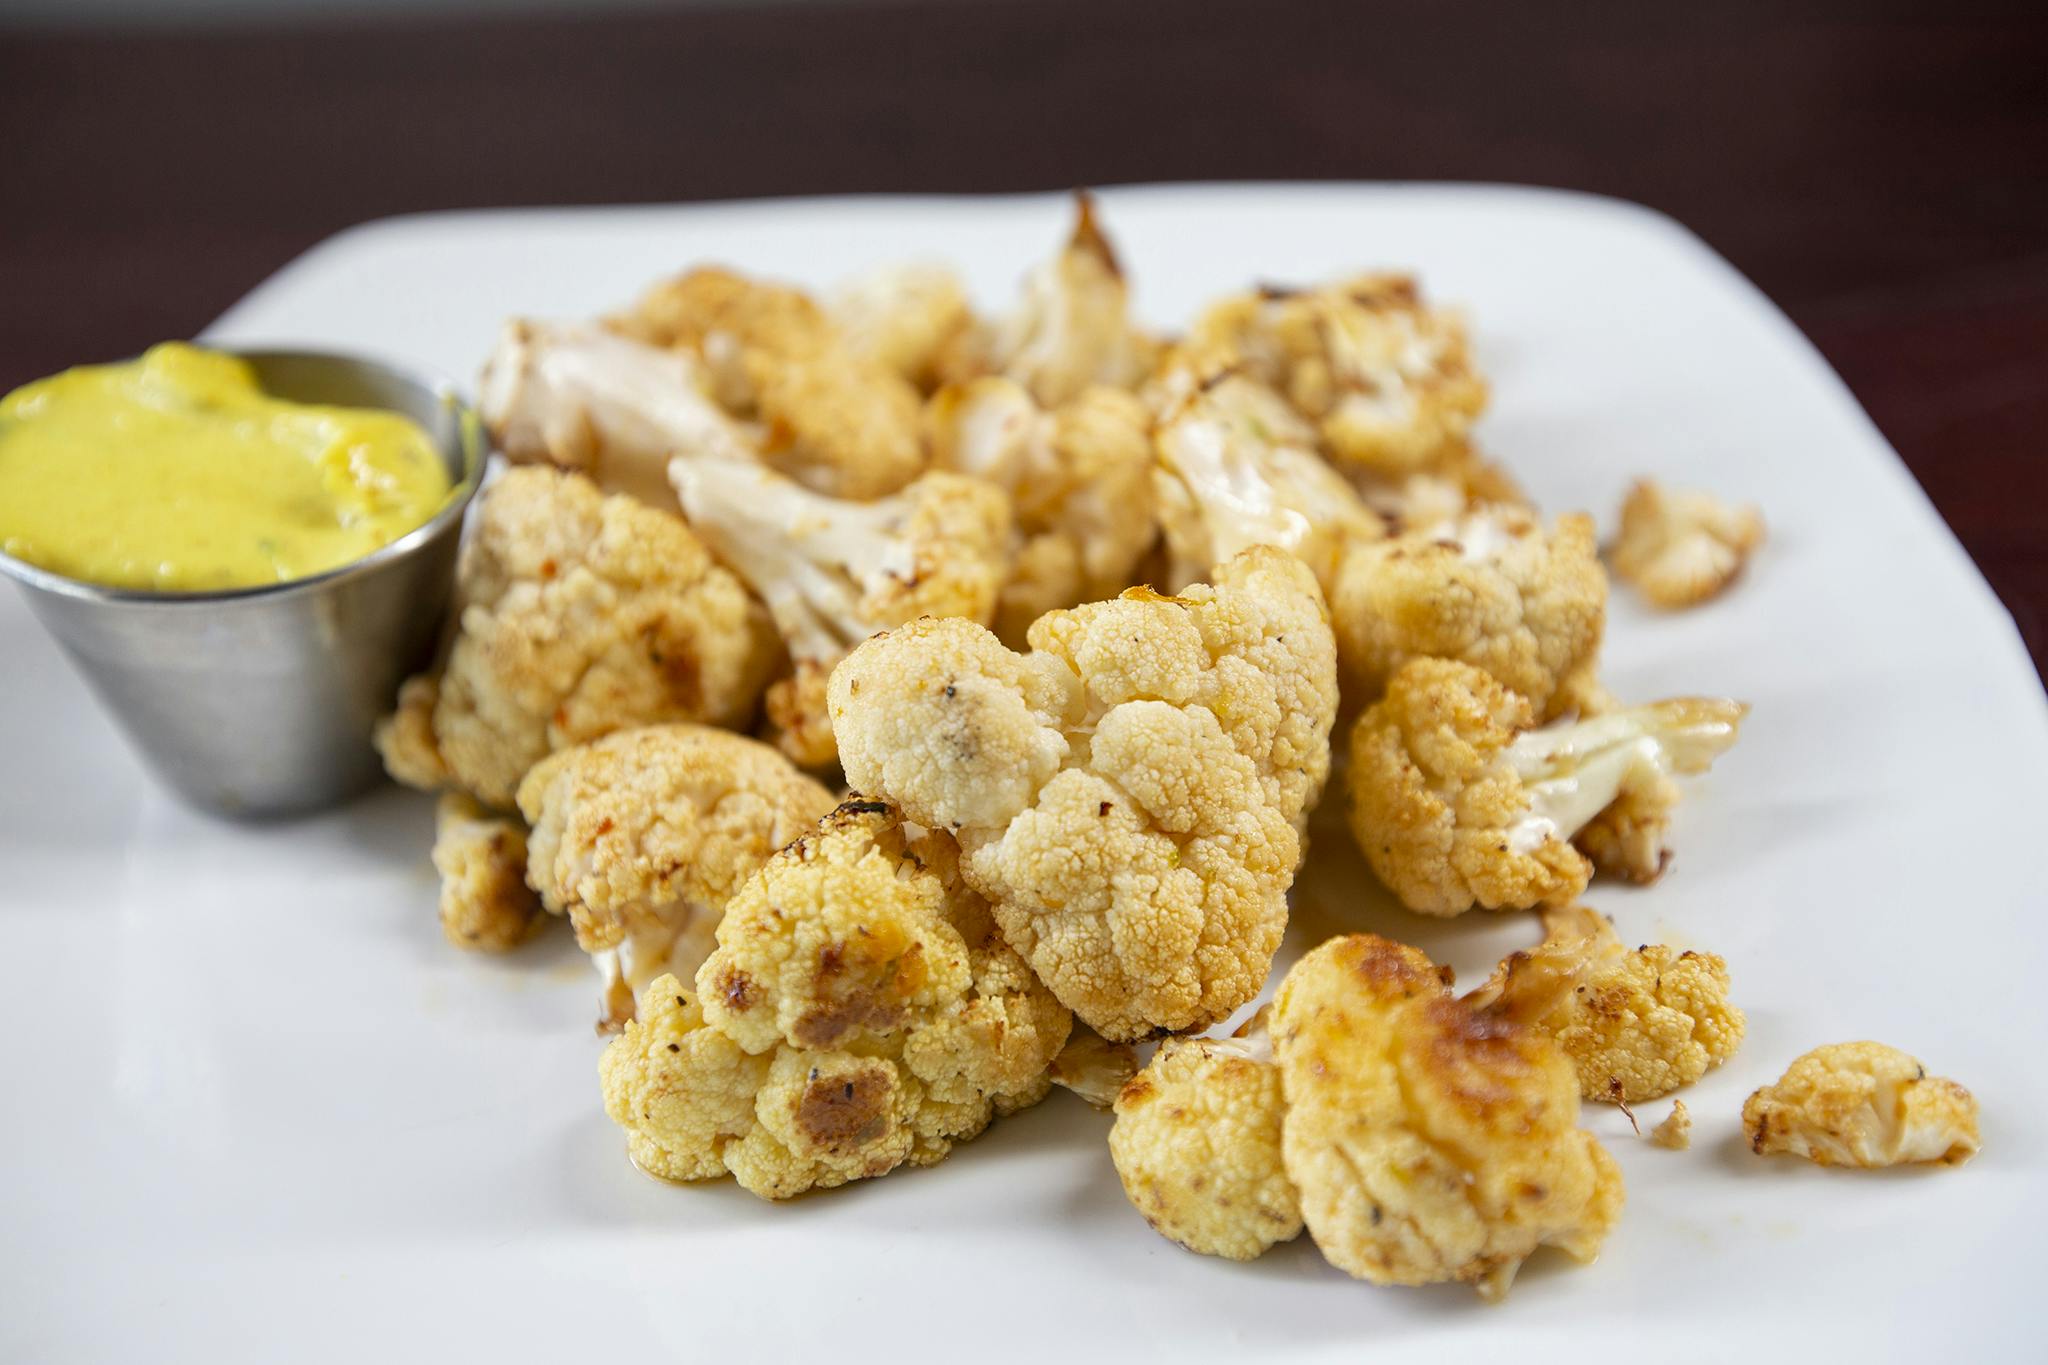 Roasted Cauliflower from Firehouse Grill - Chicago Ave in Evanston, IL